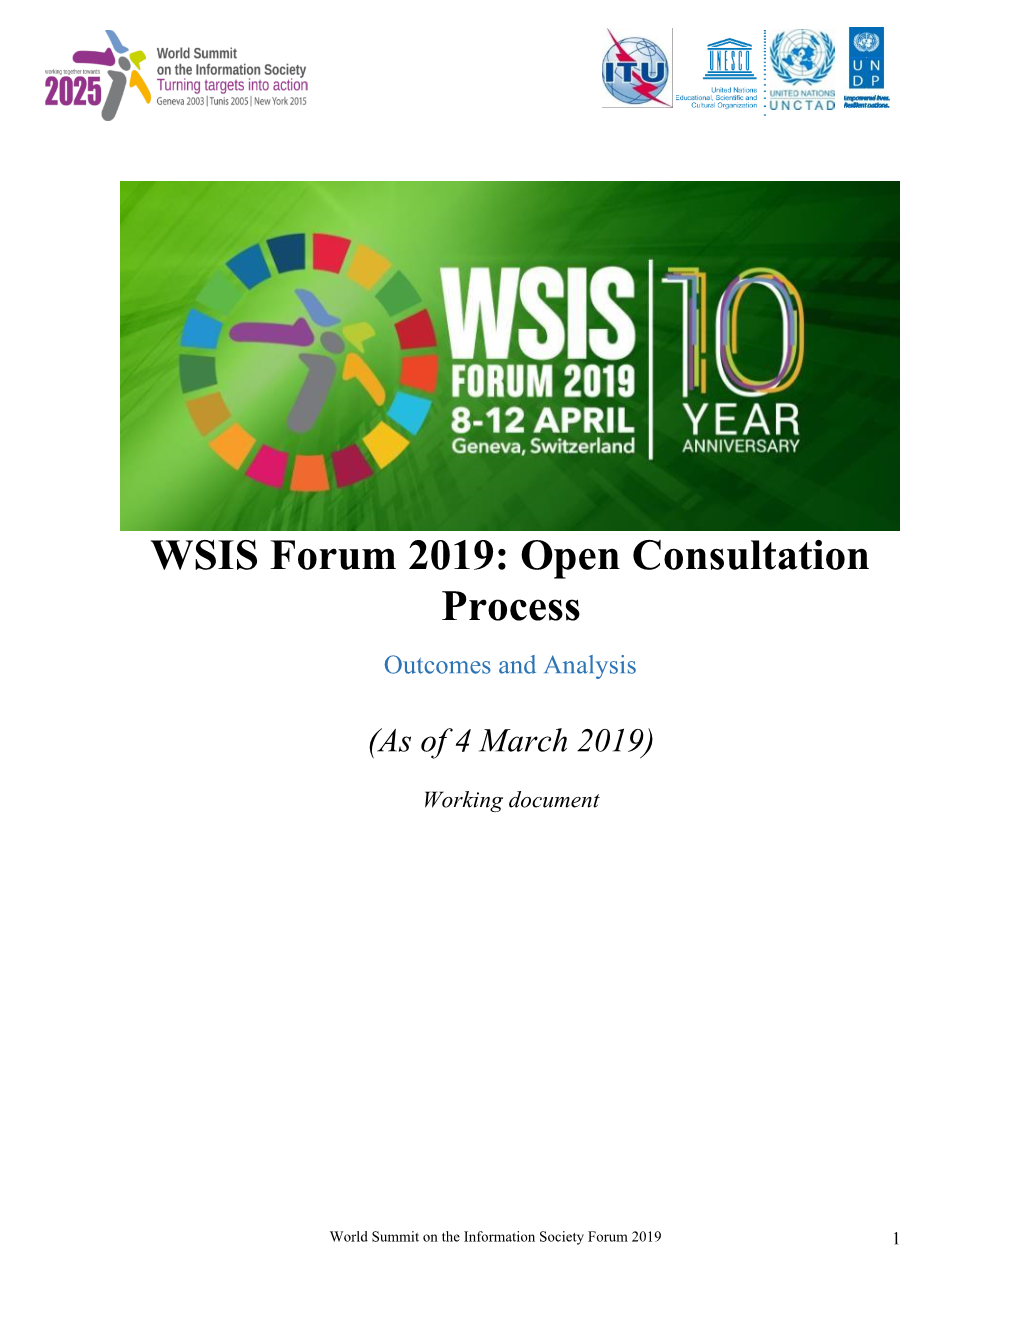 WSIS Forum 2019: Open Consultation Process Outcomes and Analysis